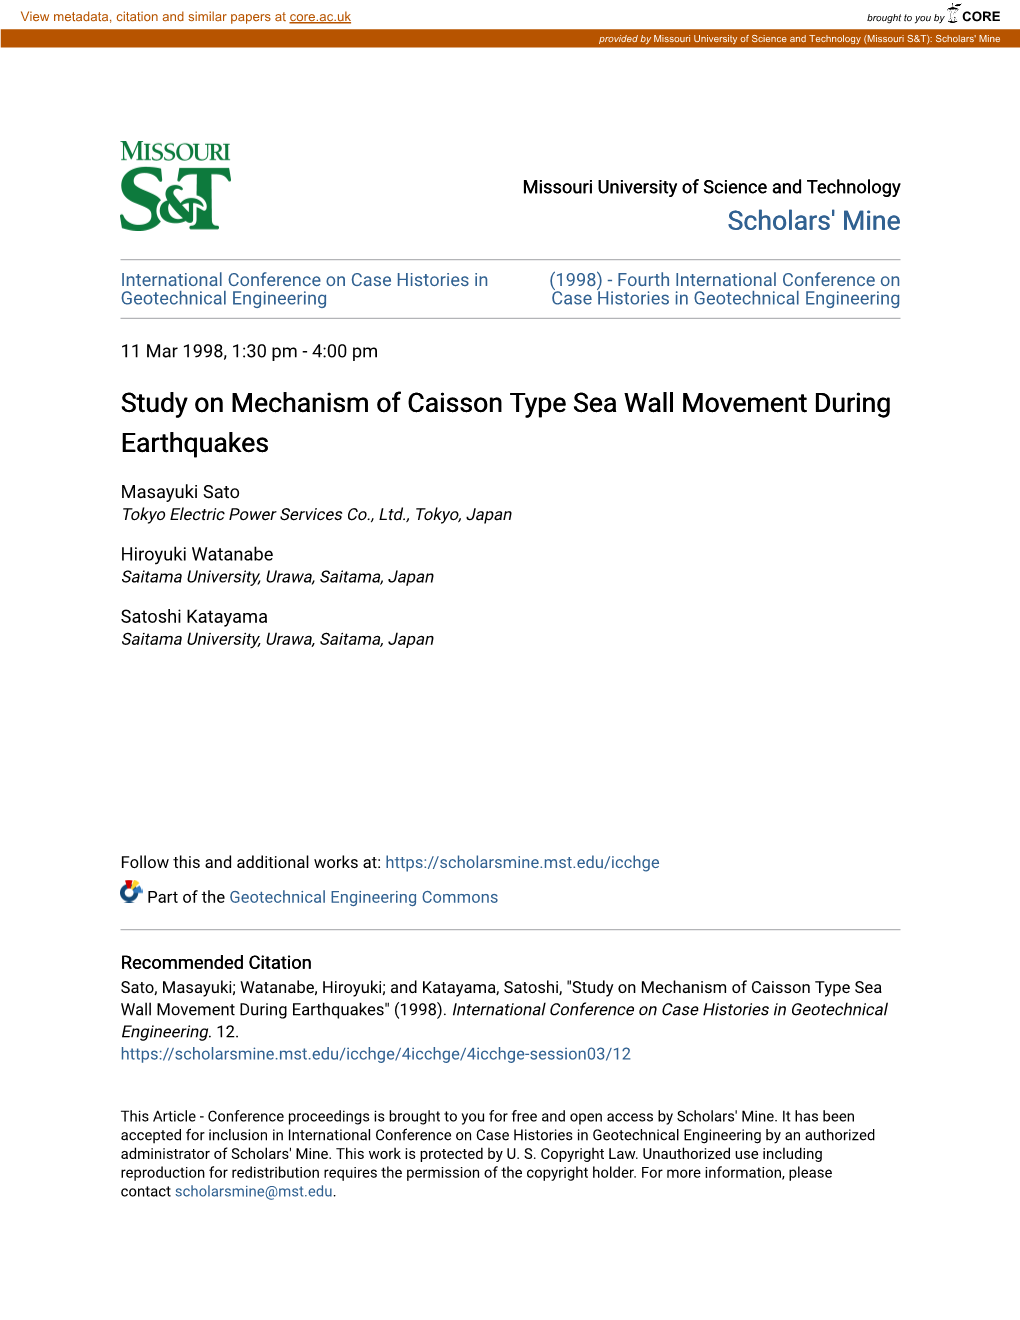 Study on Mechanism of Caisson Type Sea Wall Movement During Earthquakes